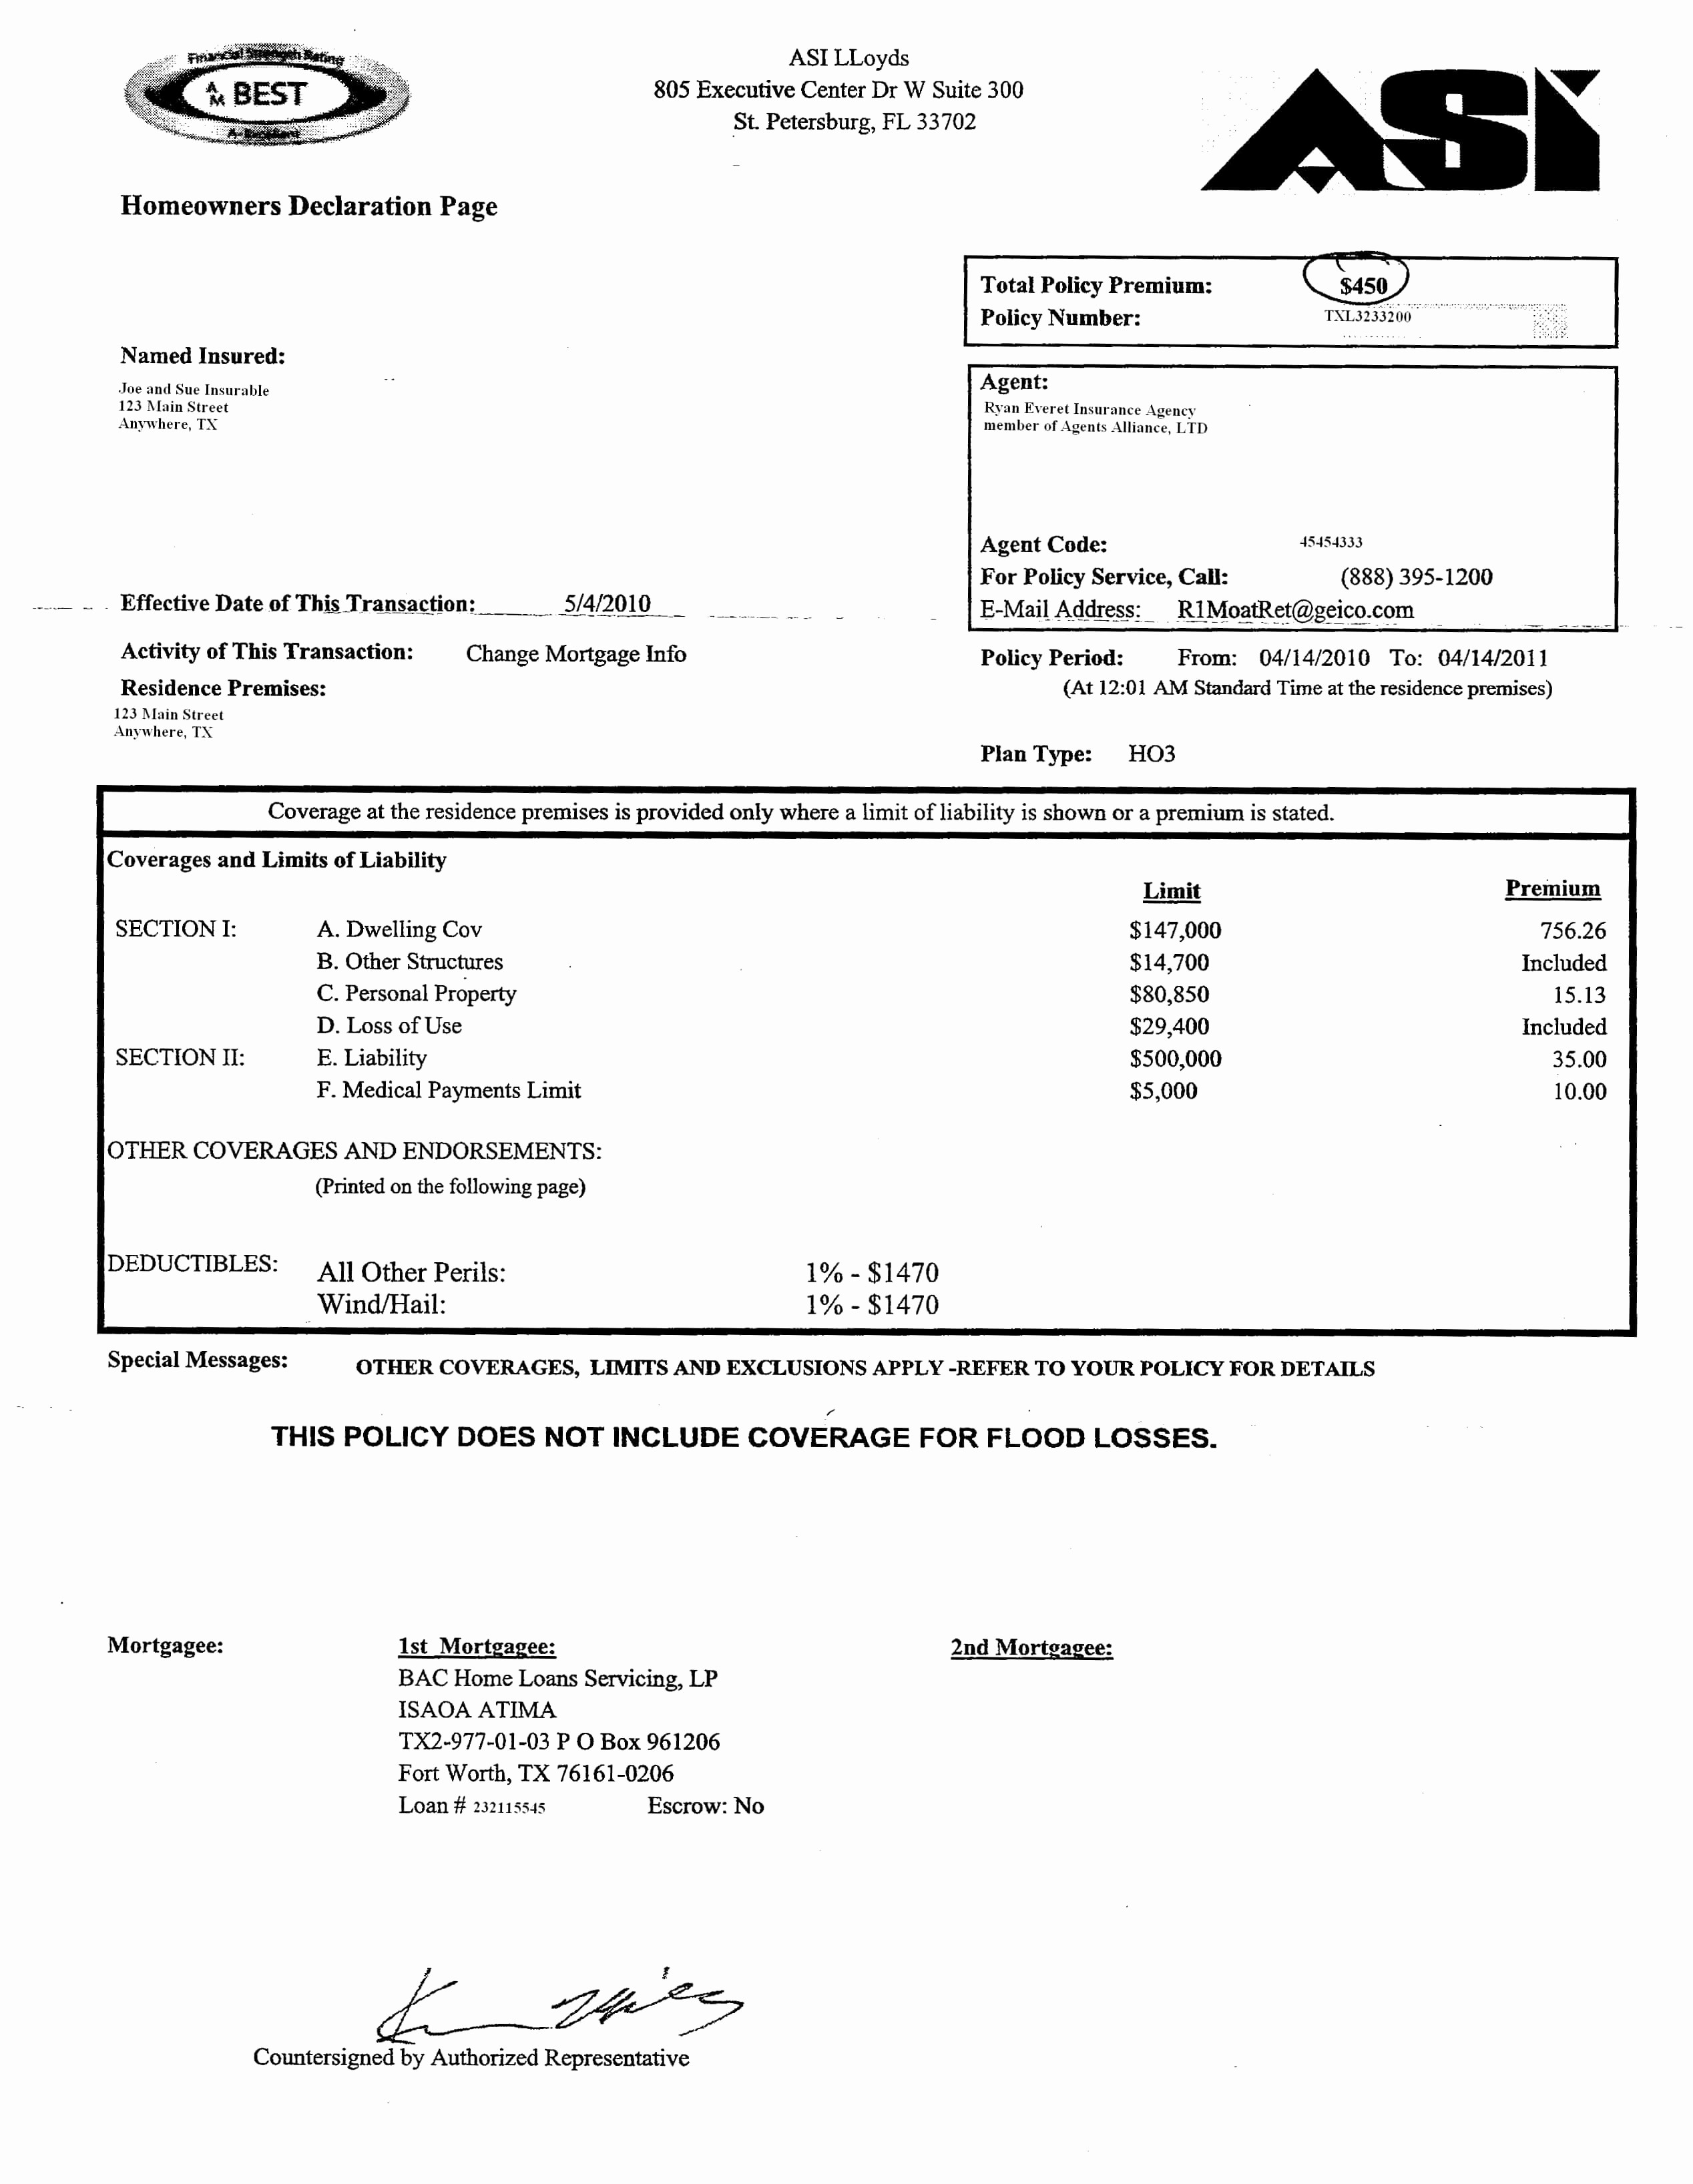 Homeowners Insurance Declaration Page Sample Elegant Car Document Example